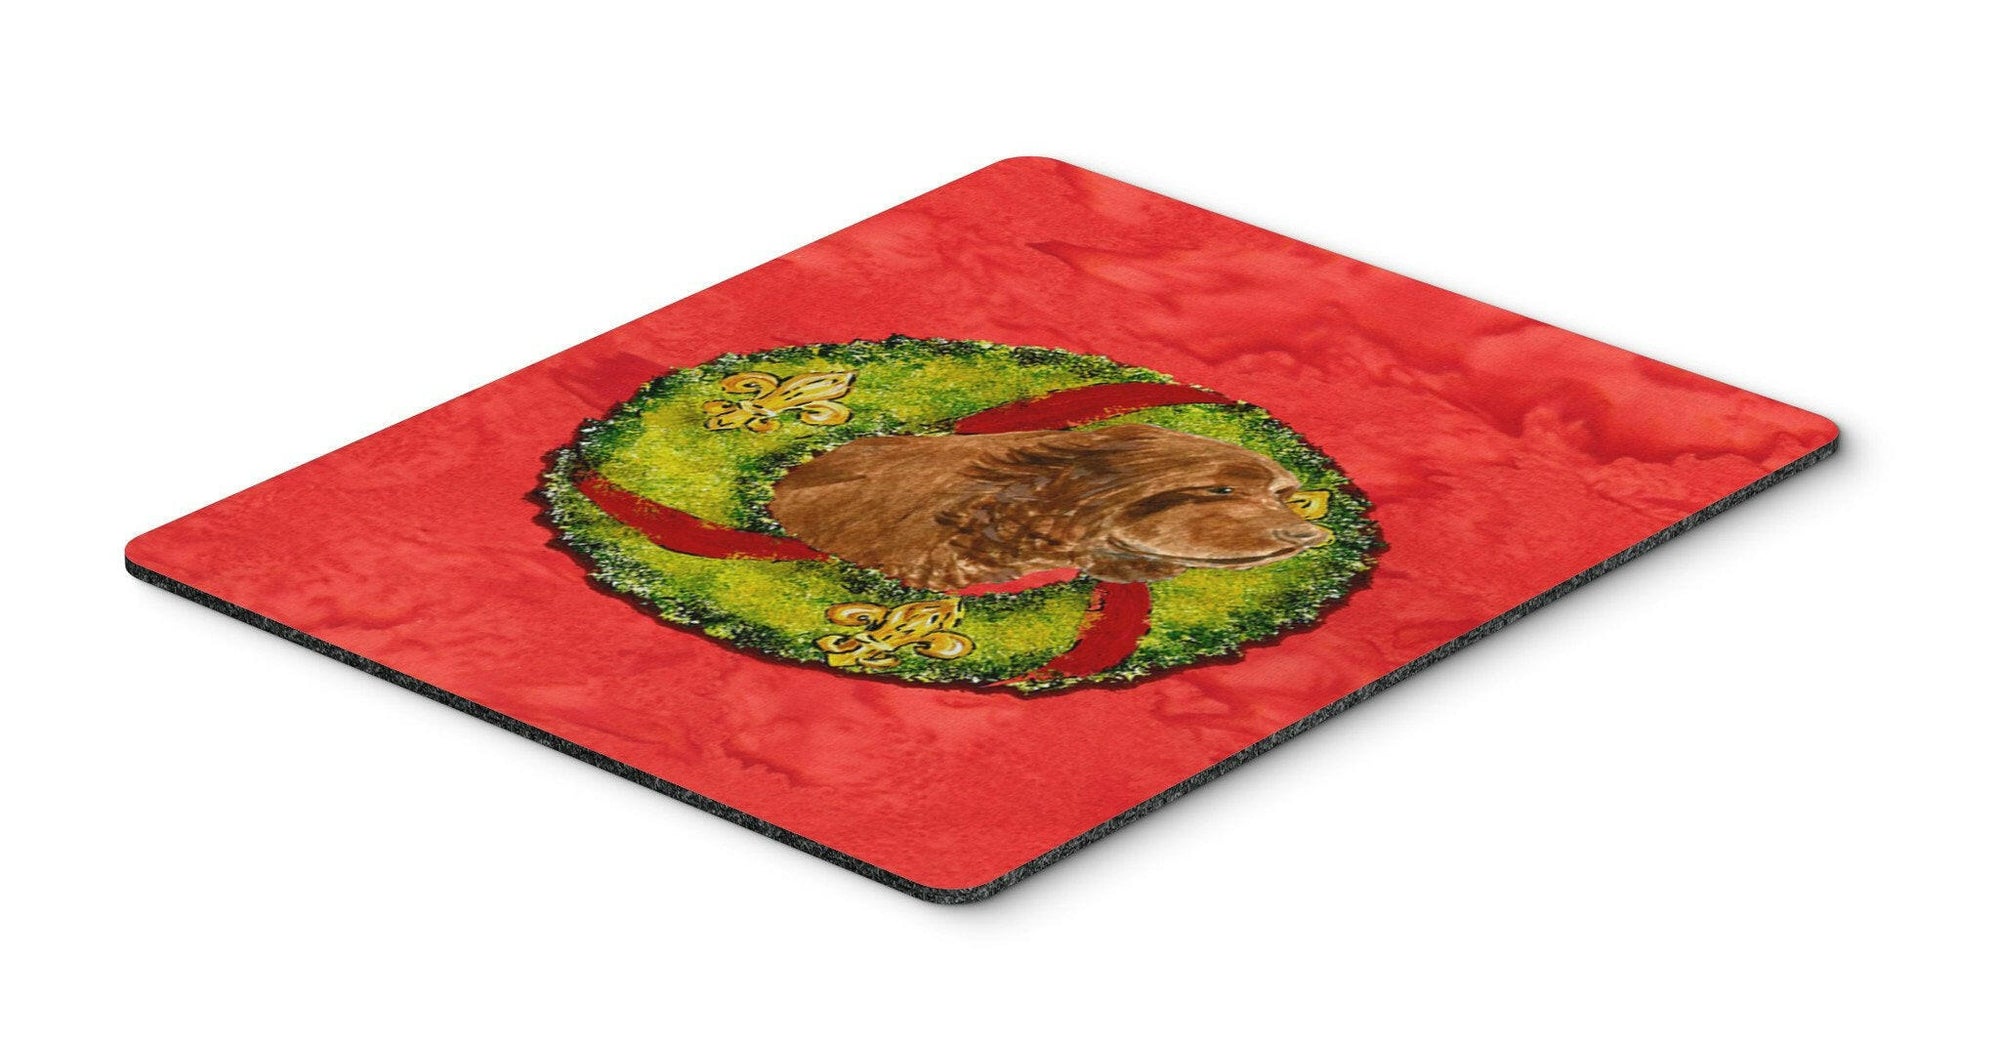 Sussex Spaniel Mouse Pad, Hot Pad or Trivet by Caroline's Treasures